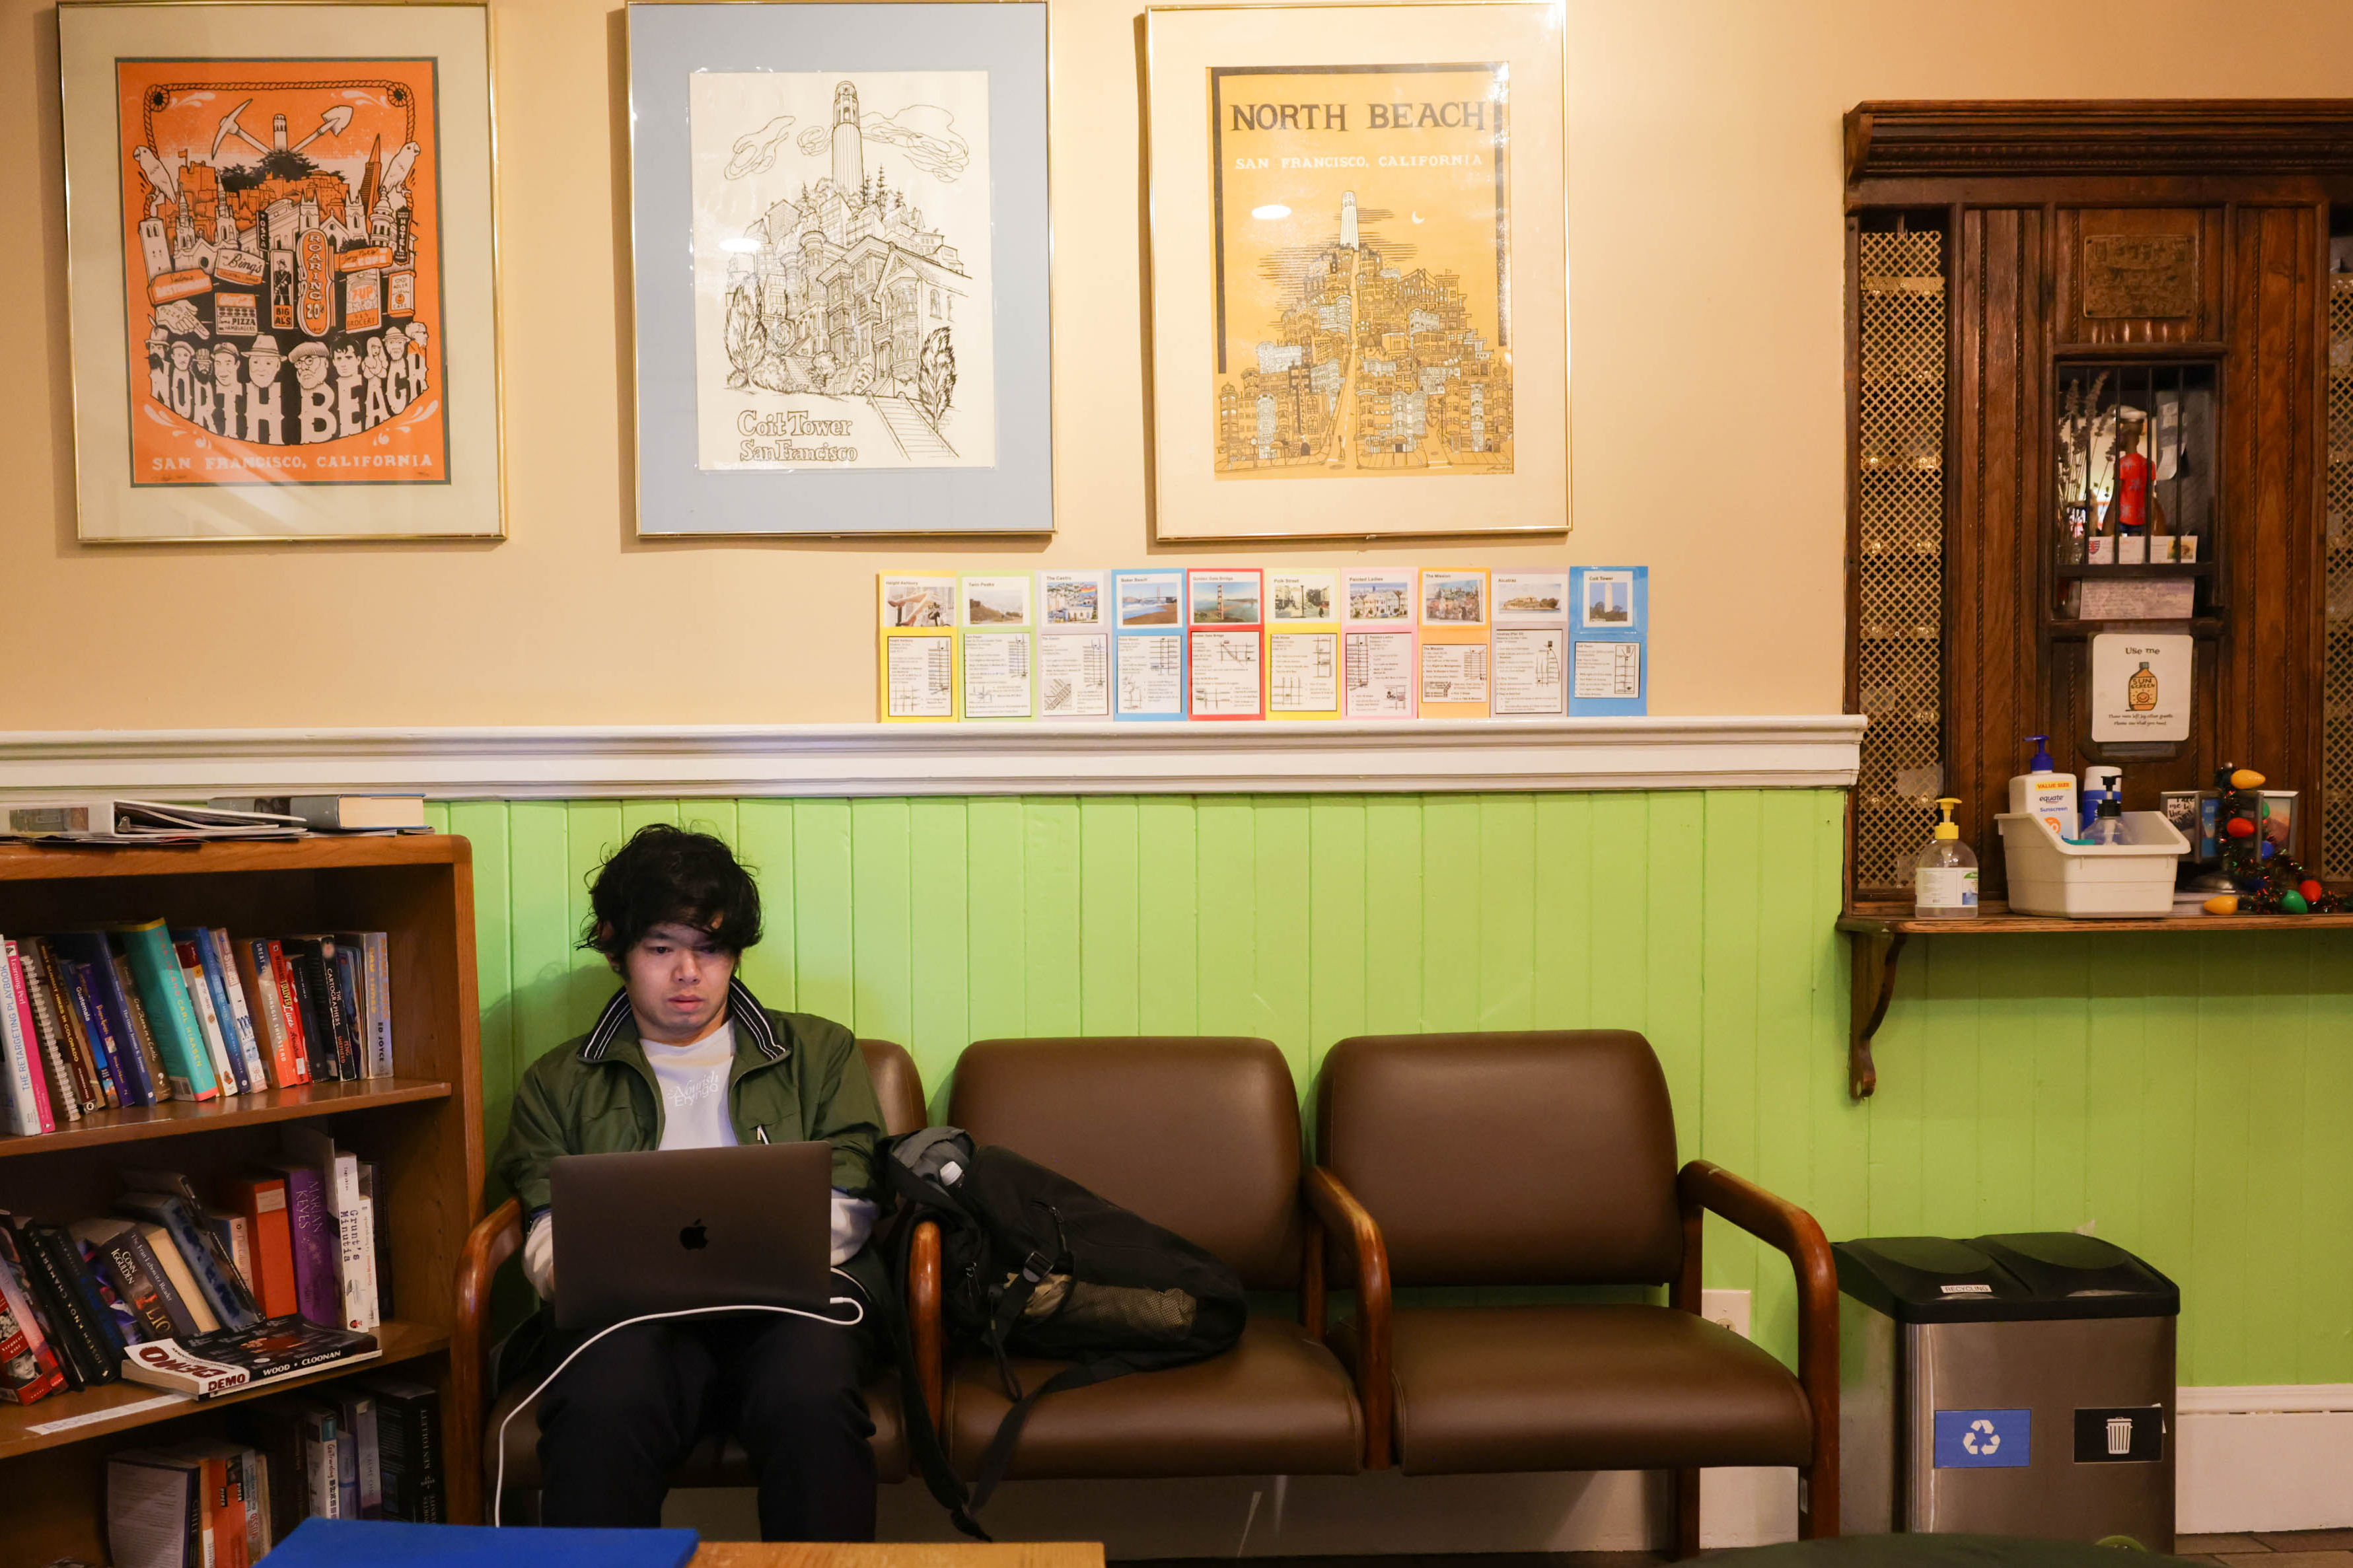 A person is seated between two chairs, using a laptop near a bookshelf, under posters, in a room with green wainscoting.